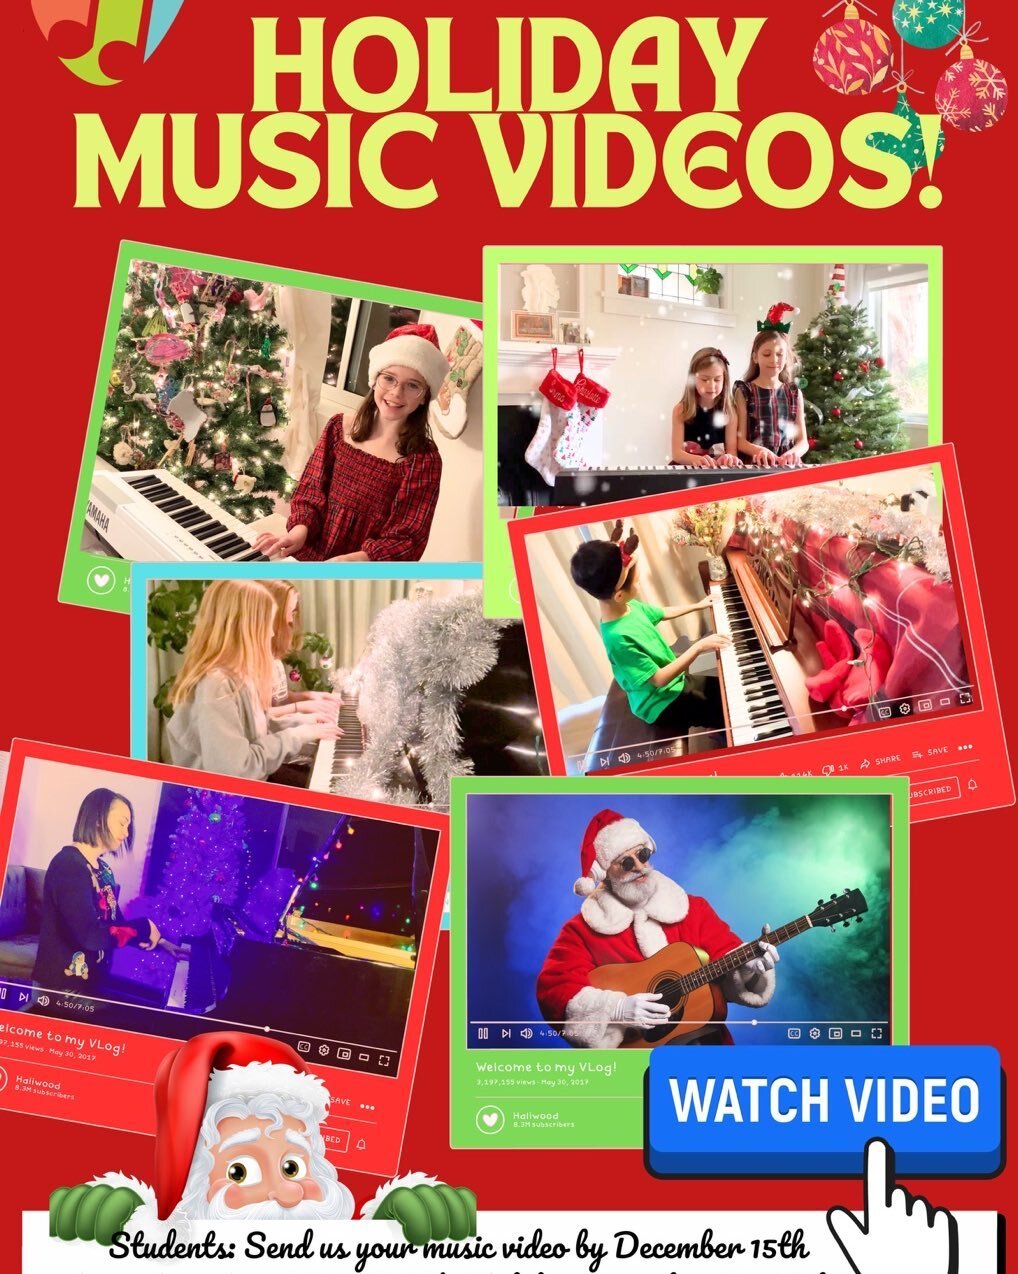 Students are currently jingling all the way towards their Dec 15th holiday music video goals! (or should be&hellip; 😉 )